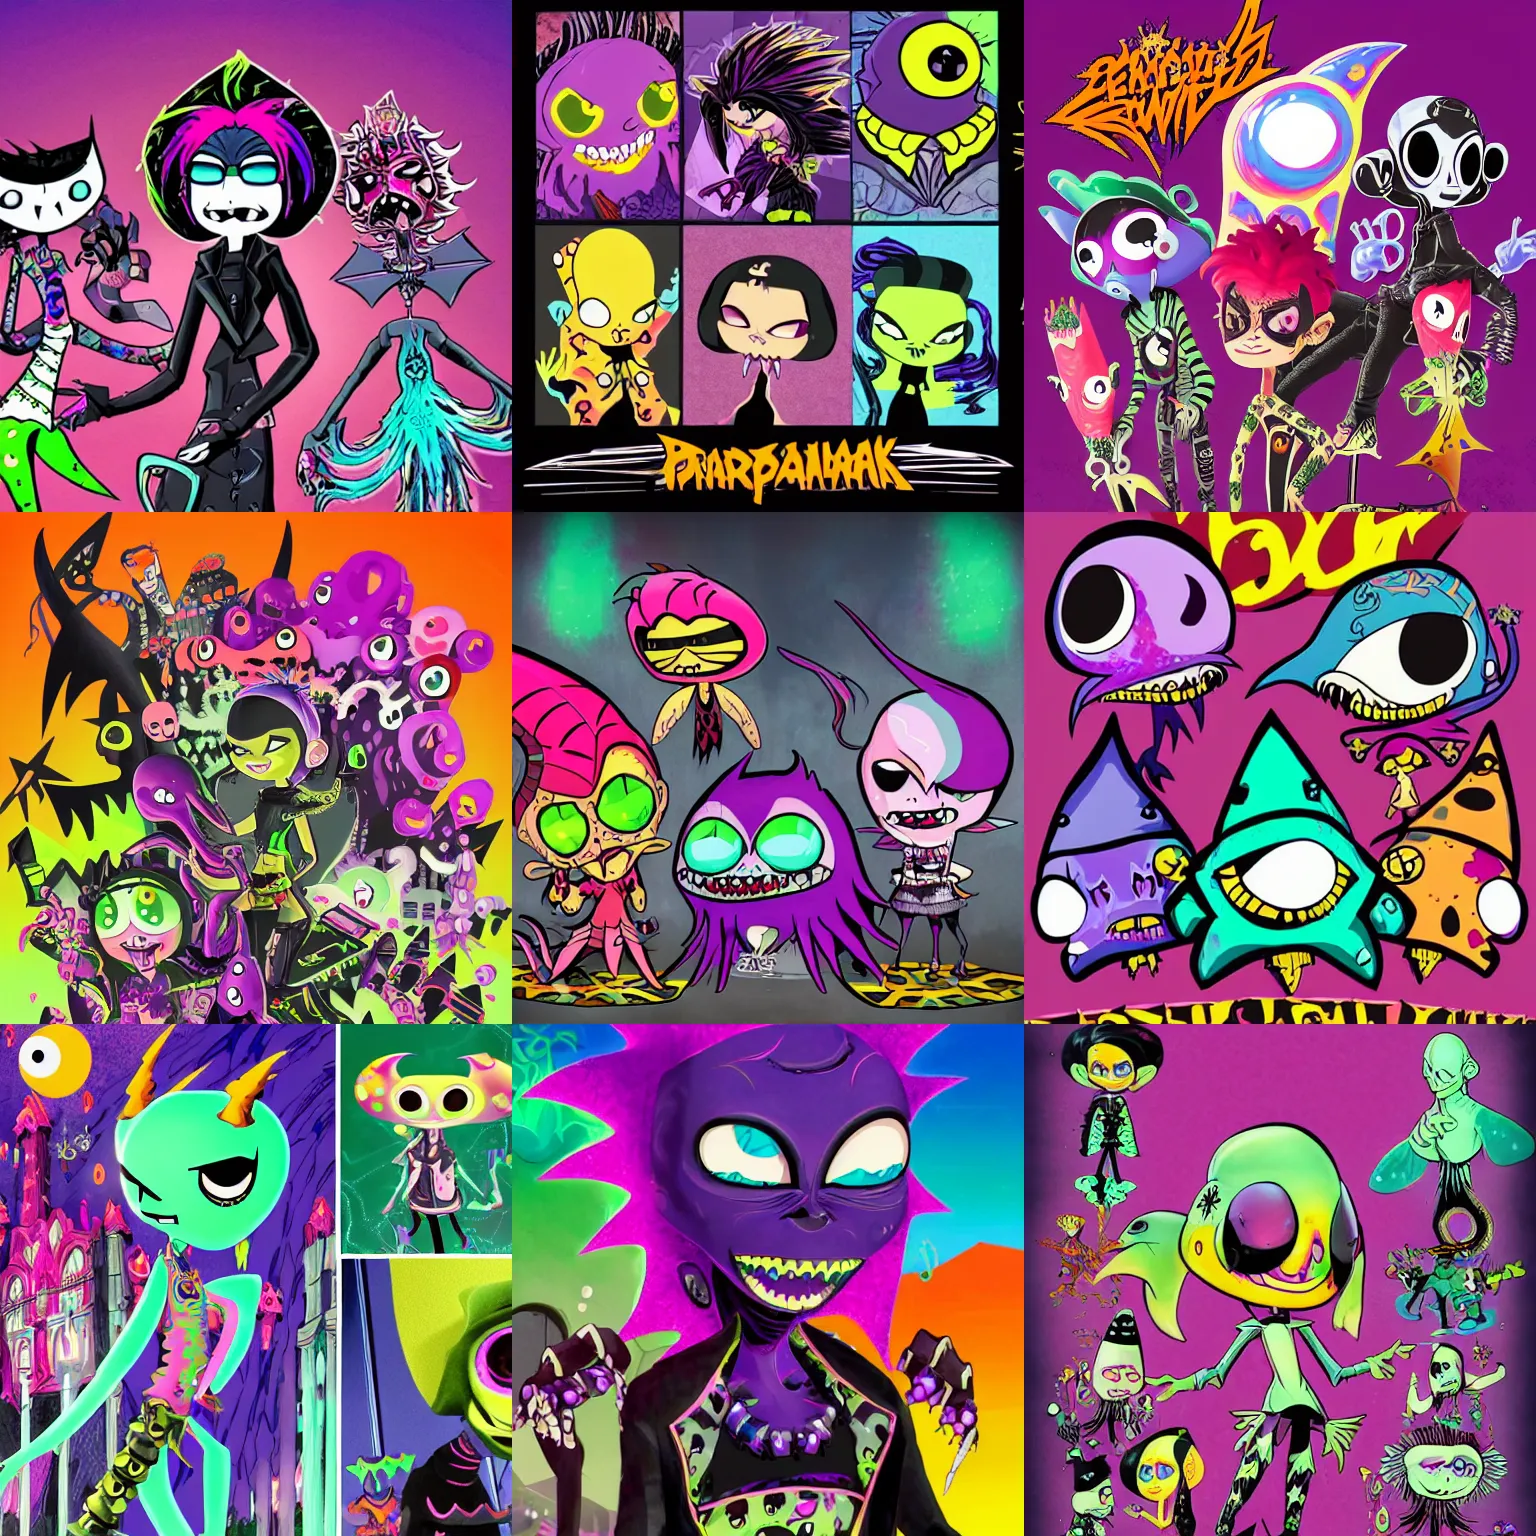 Prompt: lisa frank gothic punk vampiric rockstar vampire squid concept character designs of various shapes and sizes by genndy tartakovsky and splatoon by nintendo and the psychonauts by doublefine tim shafer artists for the new hotel transylvania film